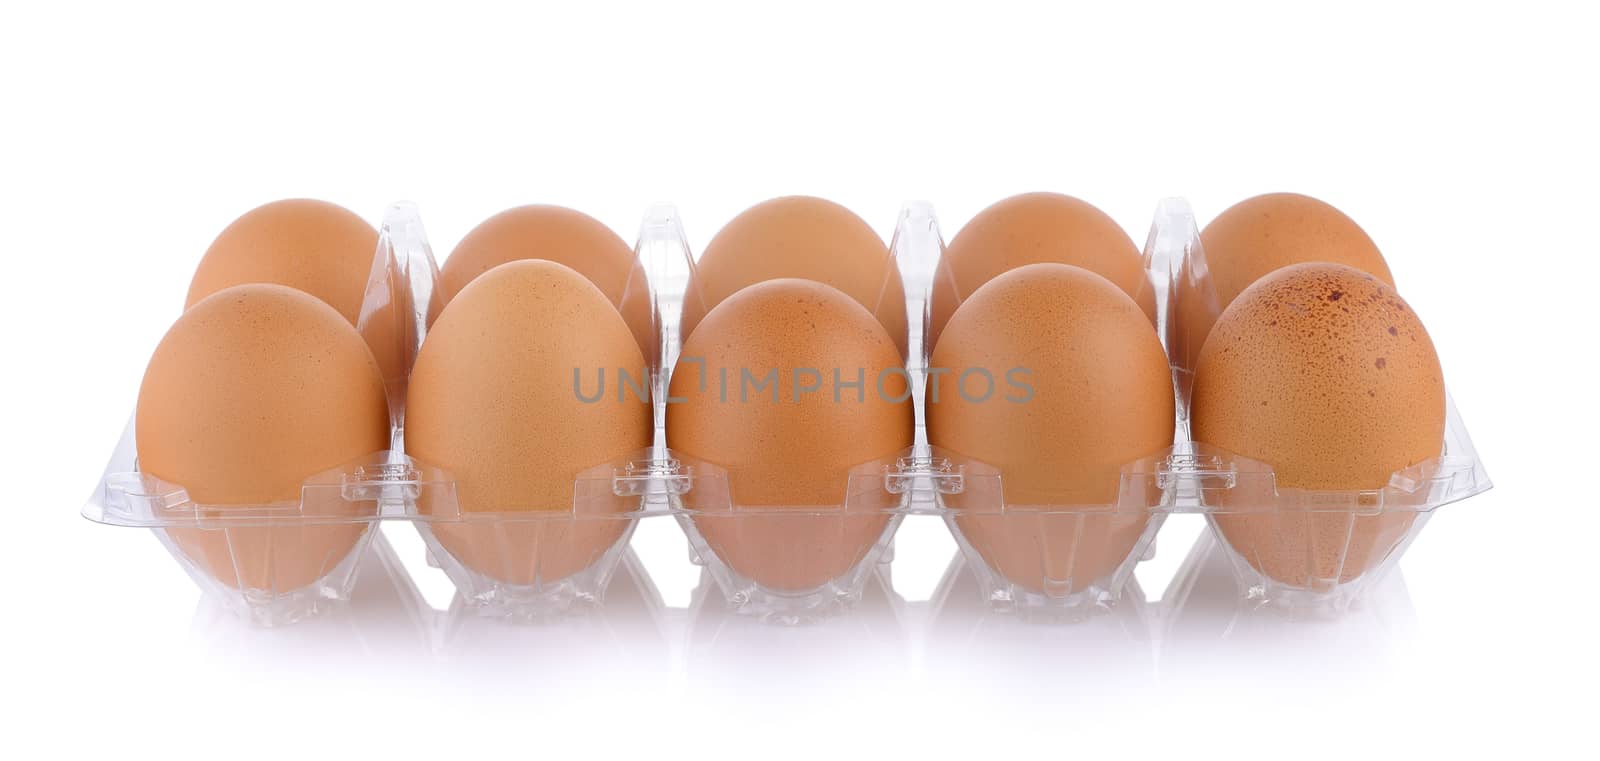 eggs in pack isolated on white background by sommai